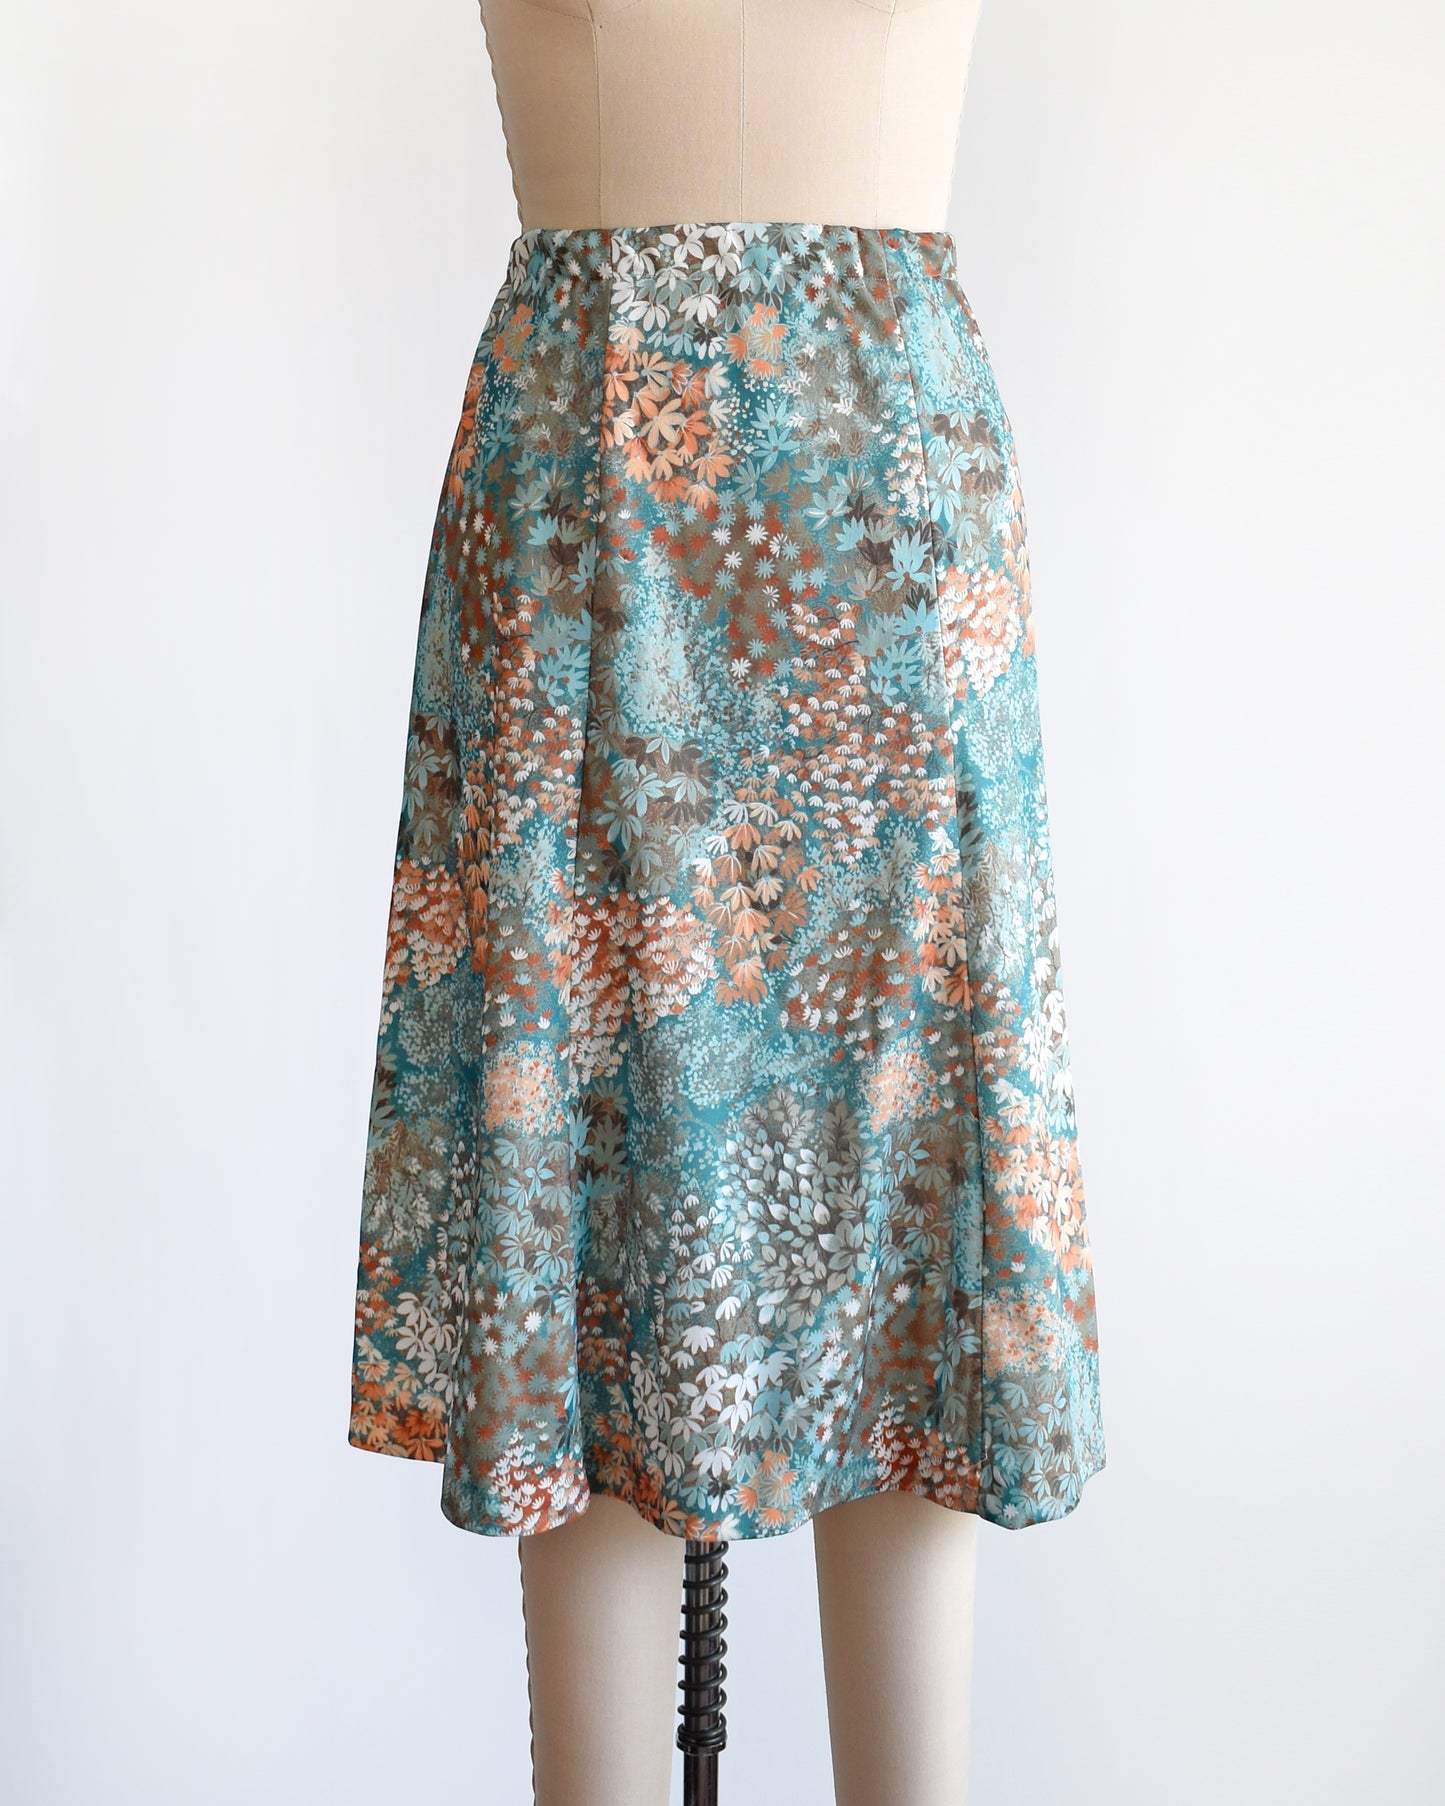 Close up of the skirt which shows the floral print